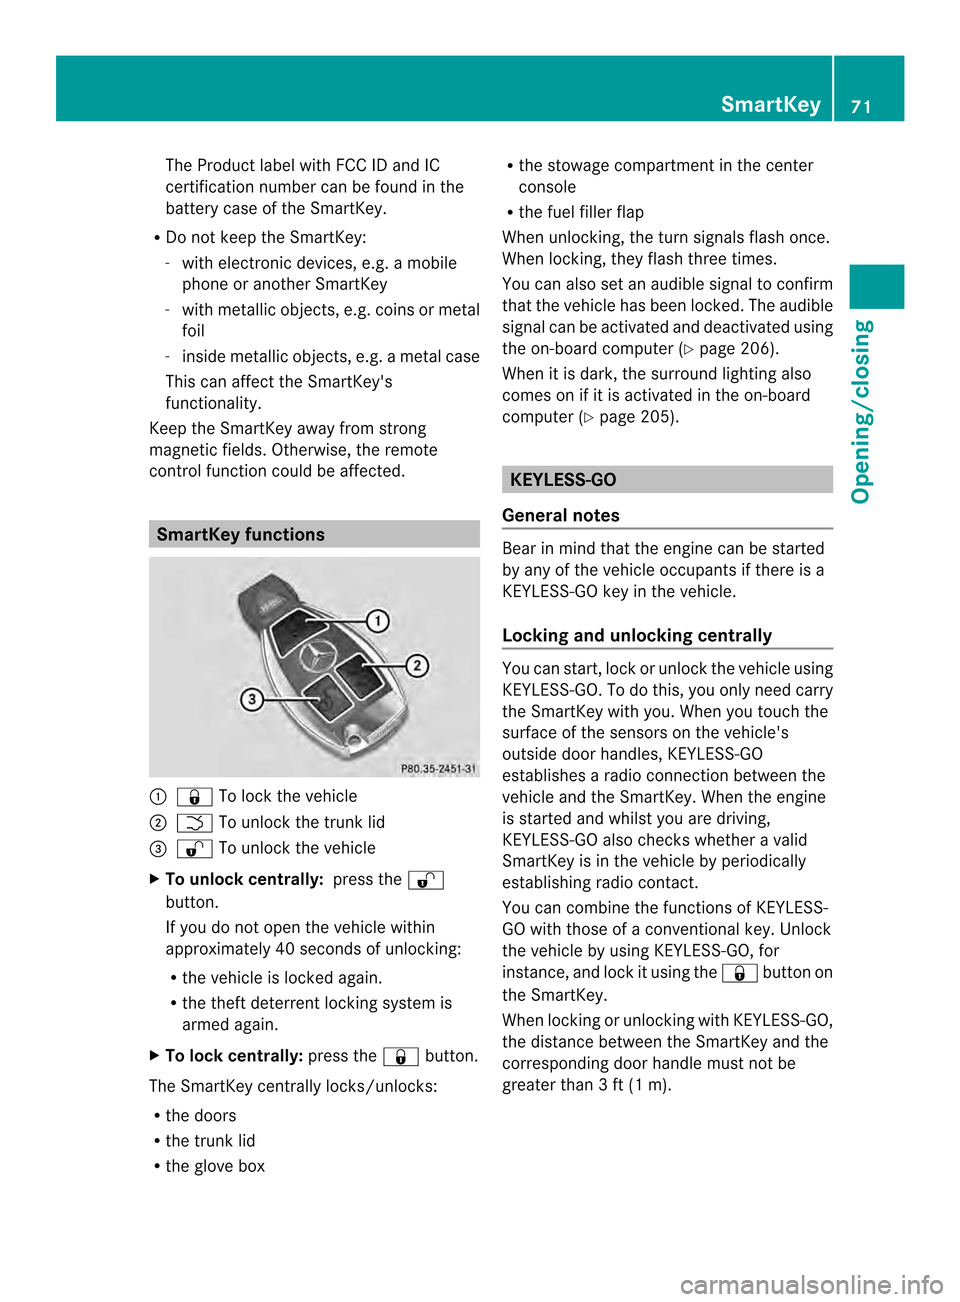 MERCEDES-BENZ SLK-Class 2013 R172 Owners Manual The Product label with FCC ID and IC
certification number can be found in the
battery case of the SmartKey.
R Do not keep the SmartKey:
- with electronic devices, e.g. a mobile
phone or another SmartK